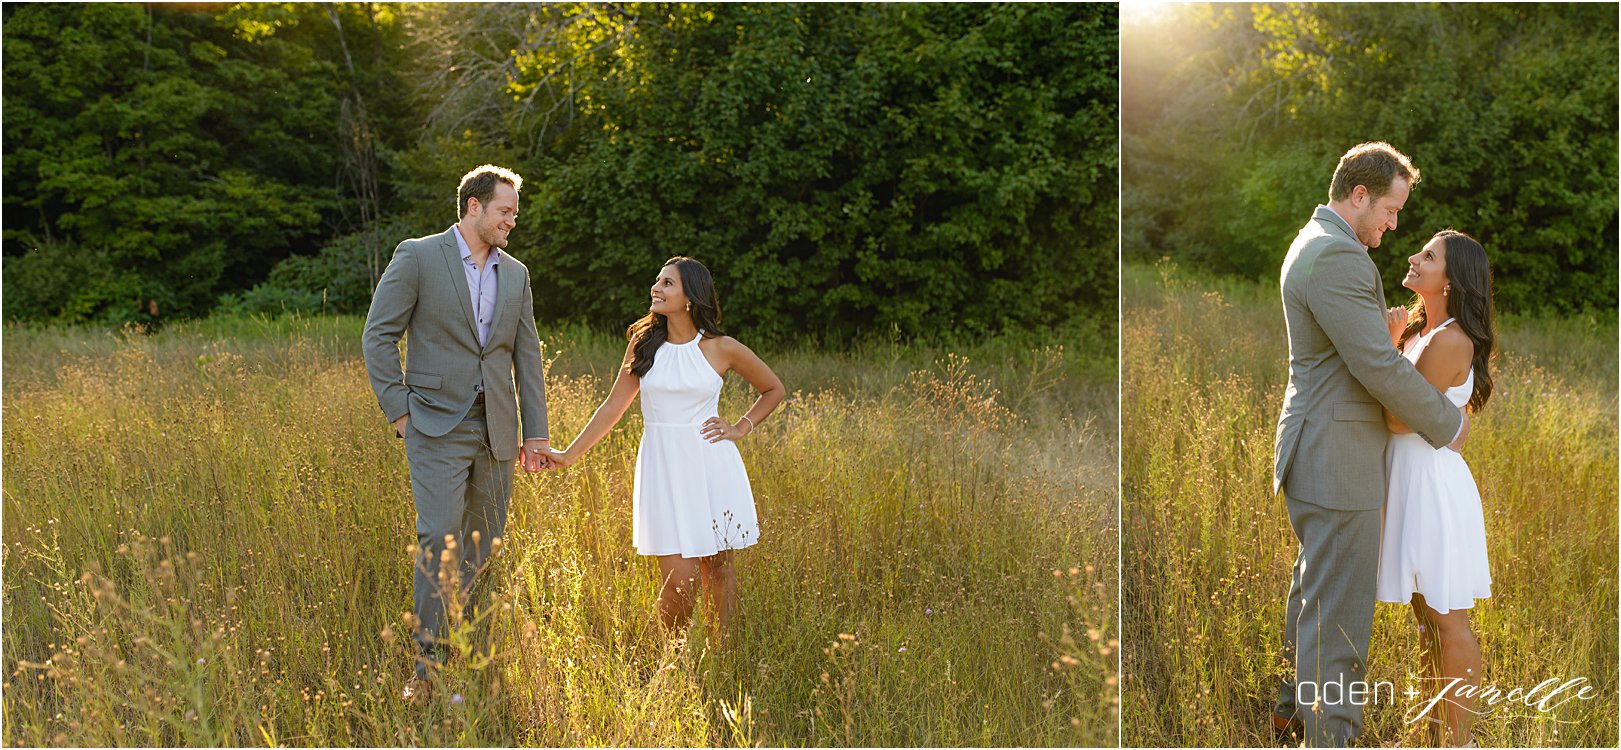 ELENA + JESSE | Oden and Janelle Photography 2016 |ODE_4920|7.jpg